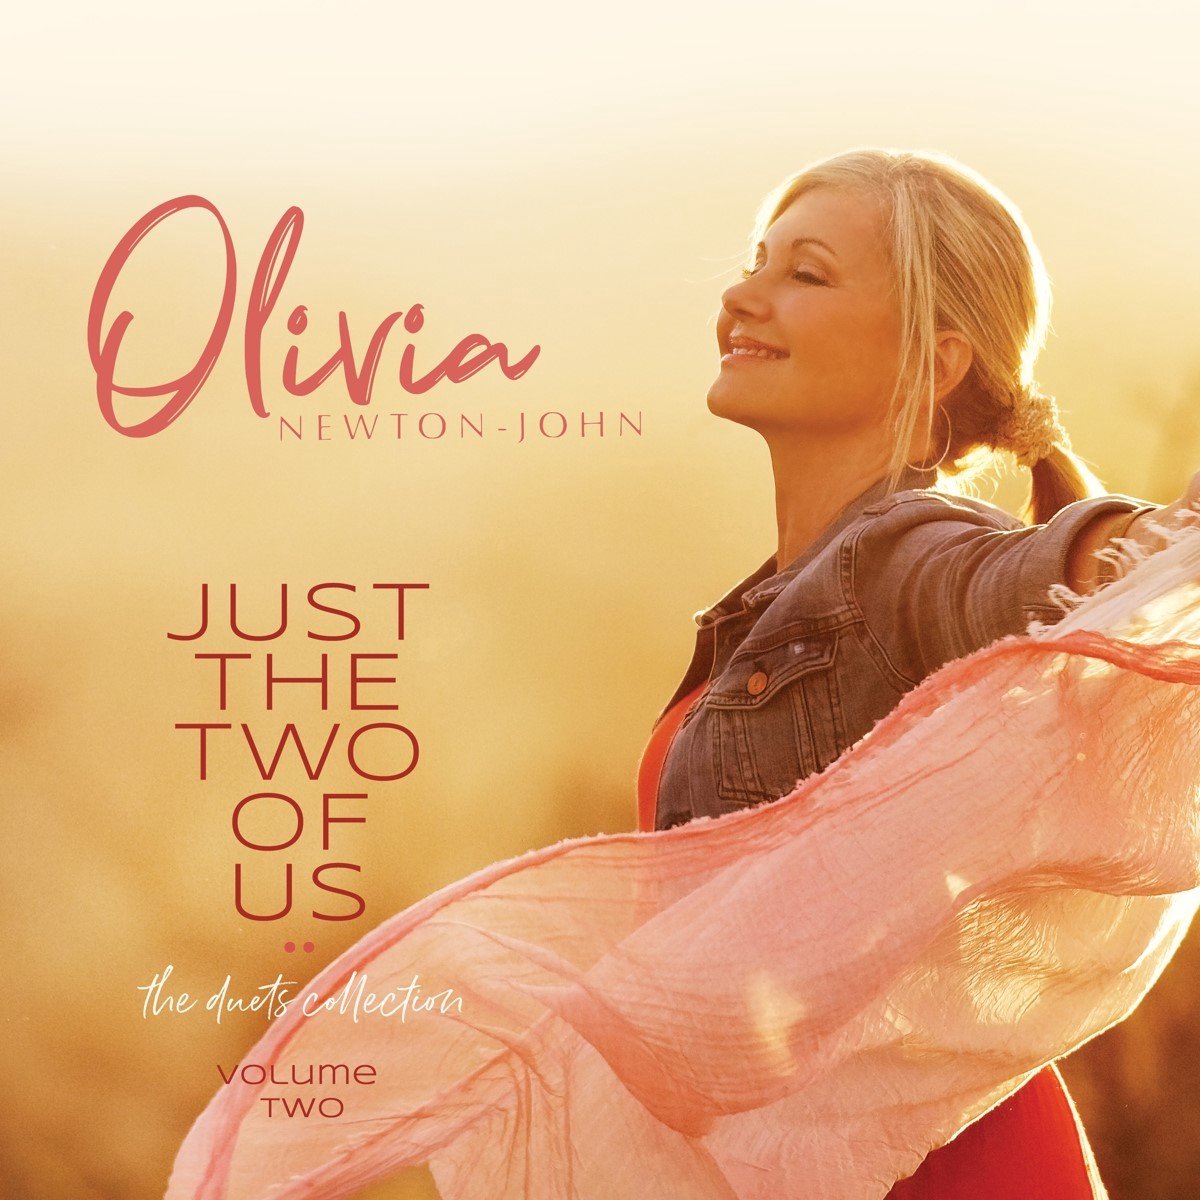 Just the Two of Us: The Duets Collection Volume Two | Olivia Newton-John